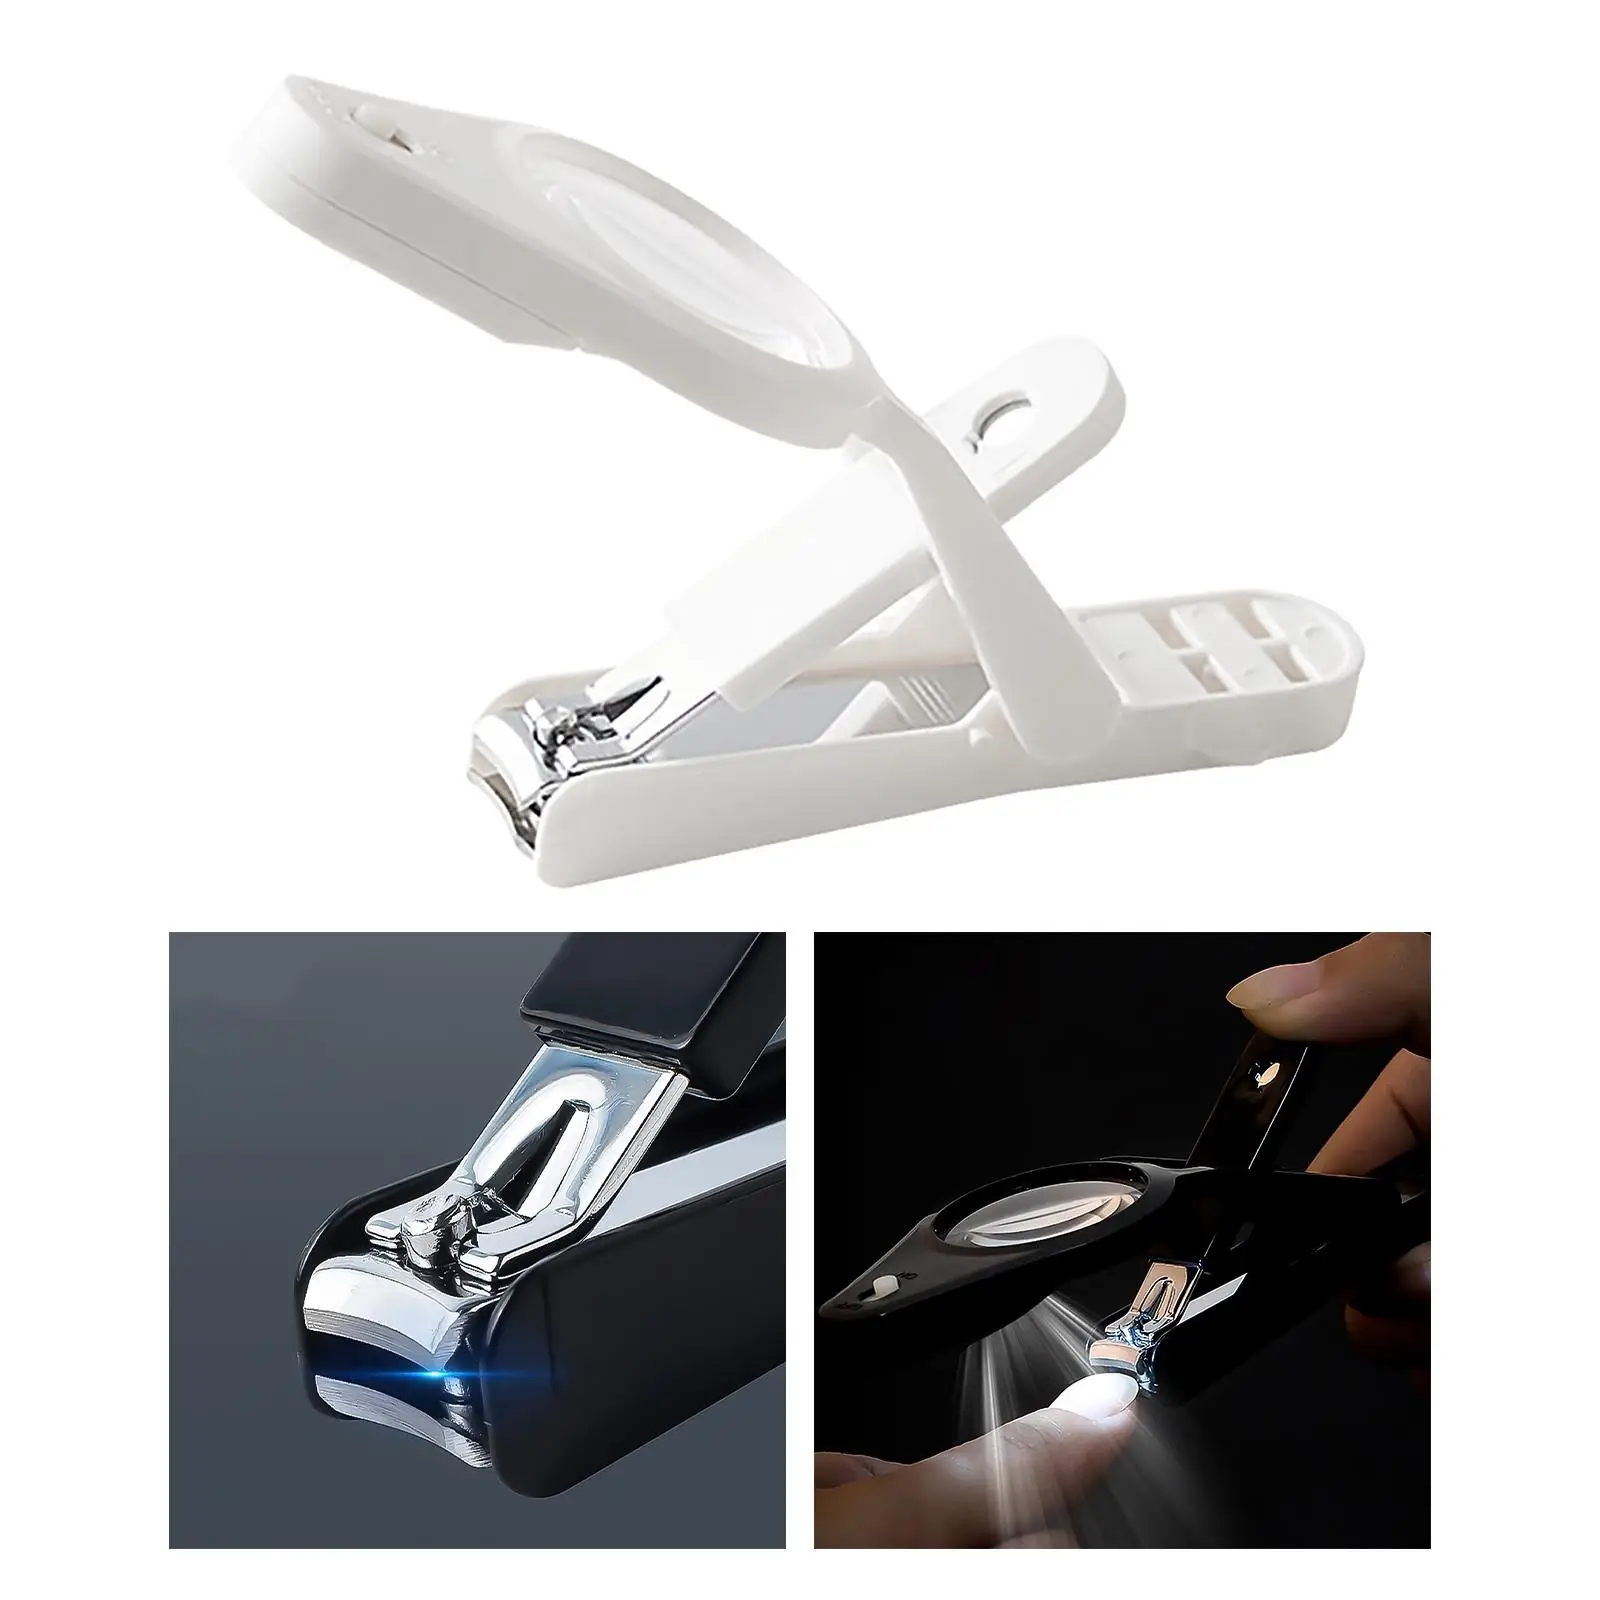 Nail Clippers with Magnifying Mirror files Buffer with LED Light Cutter Trimmer for Toenail Fingernail Infant Children Elderly